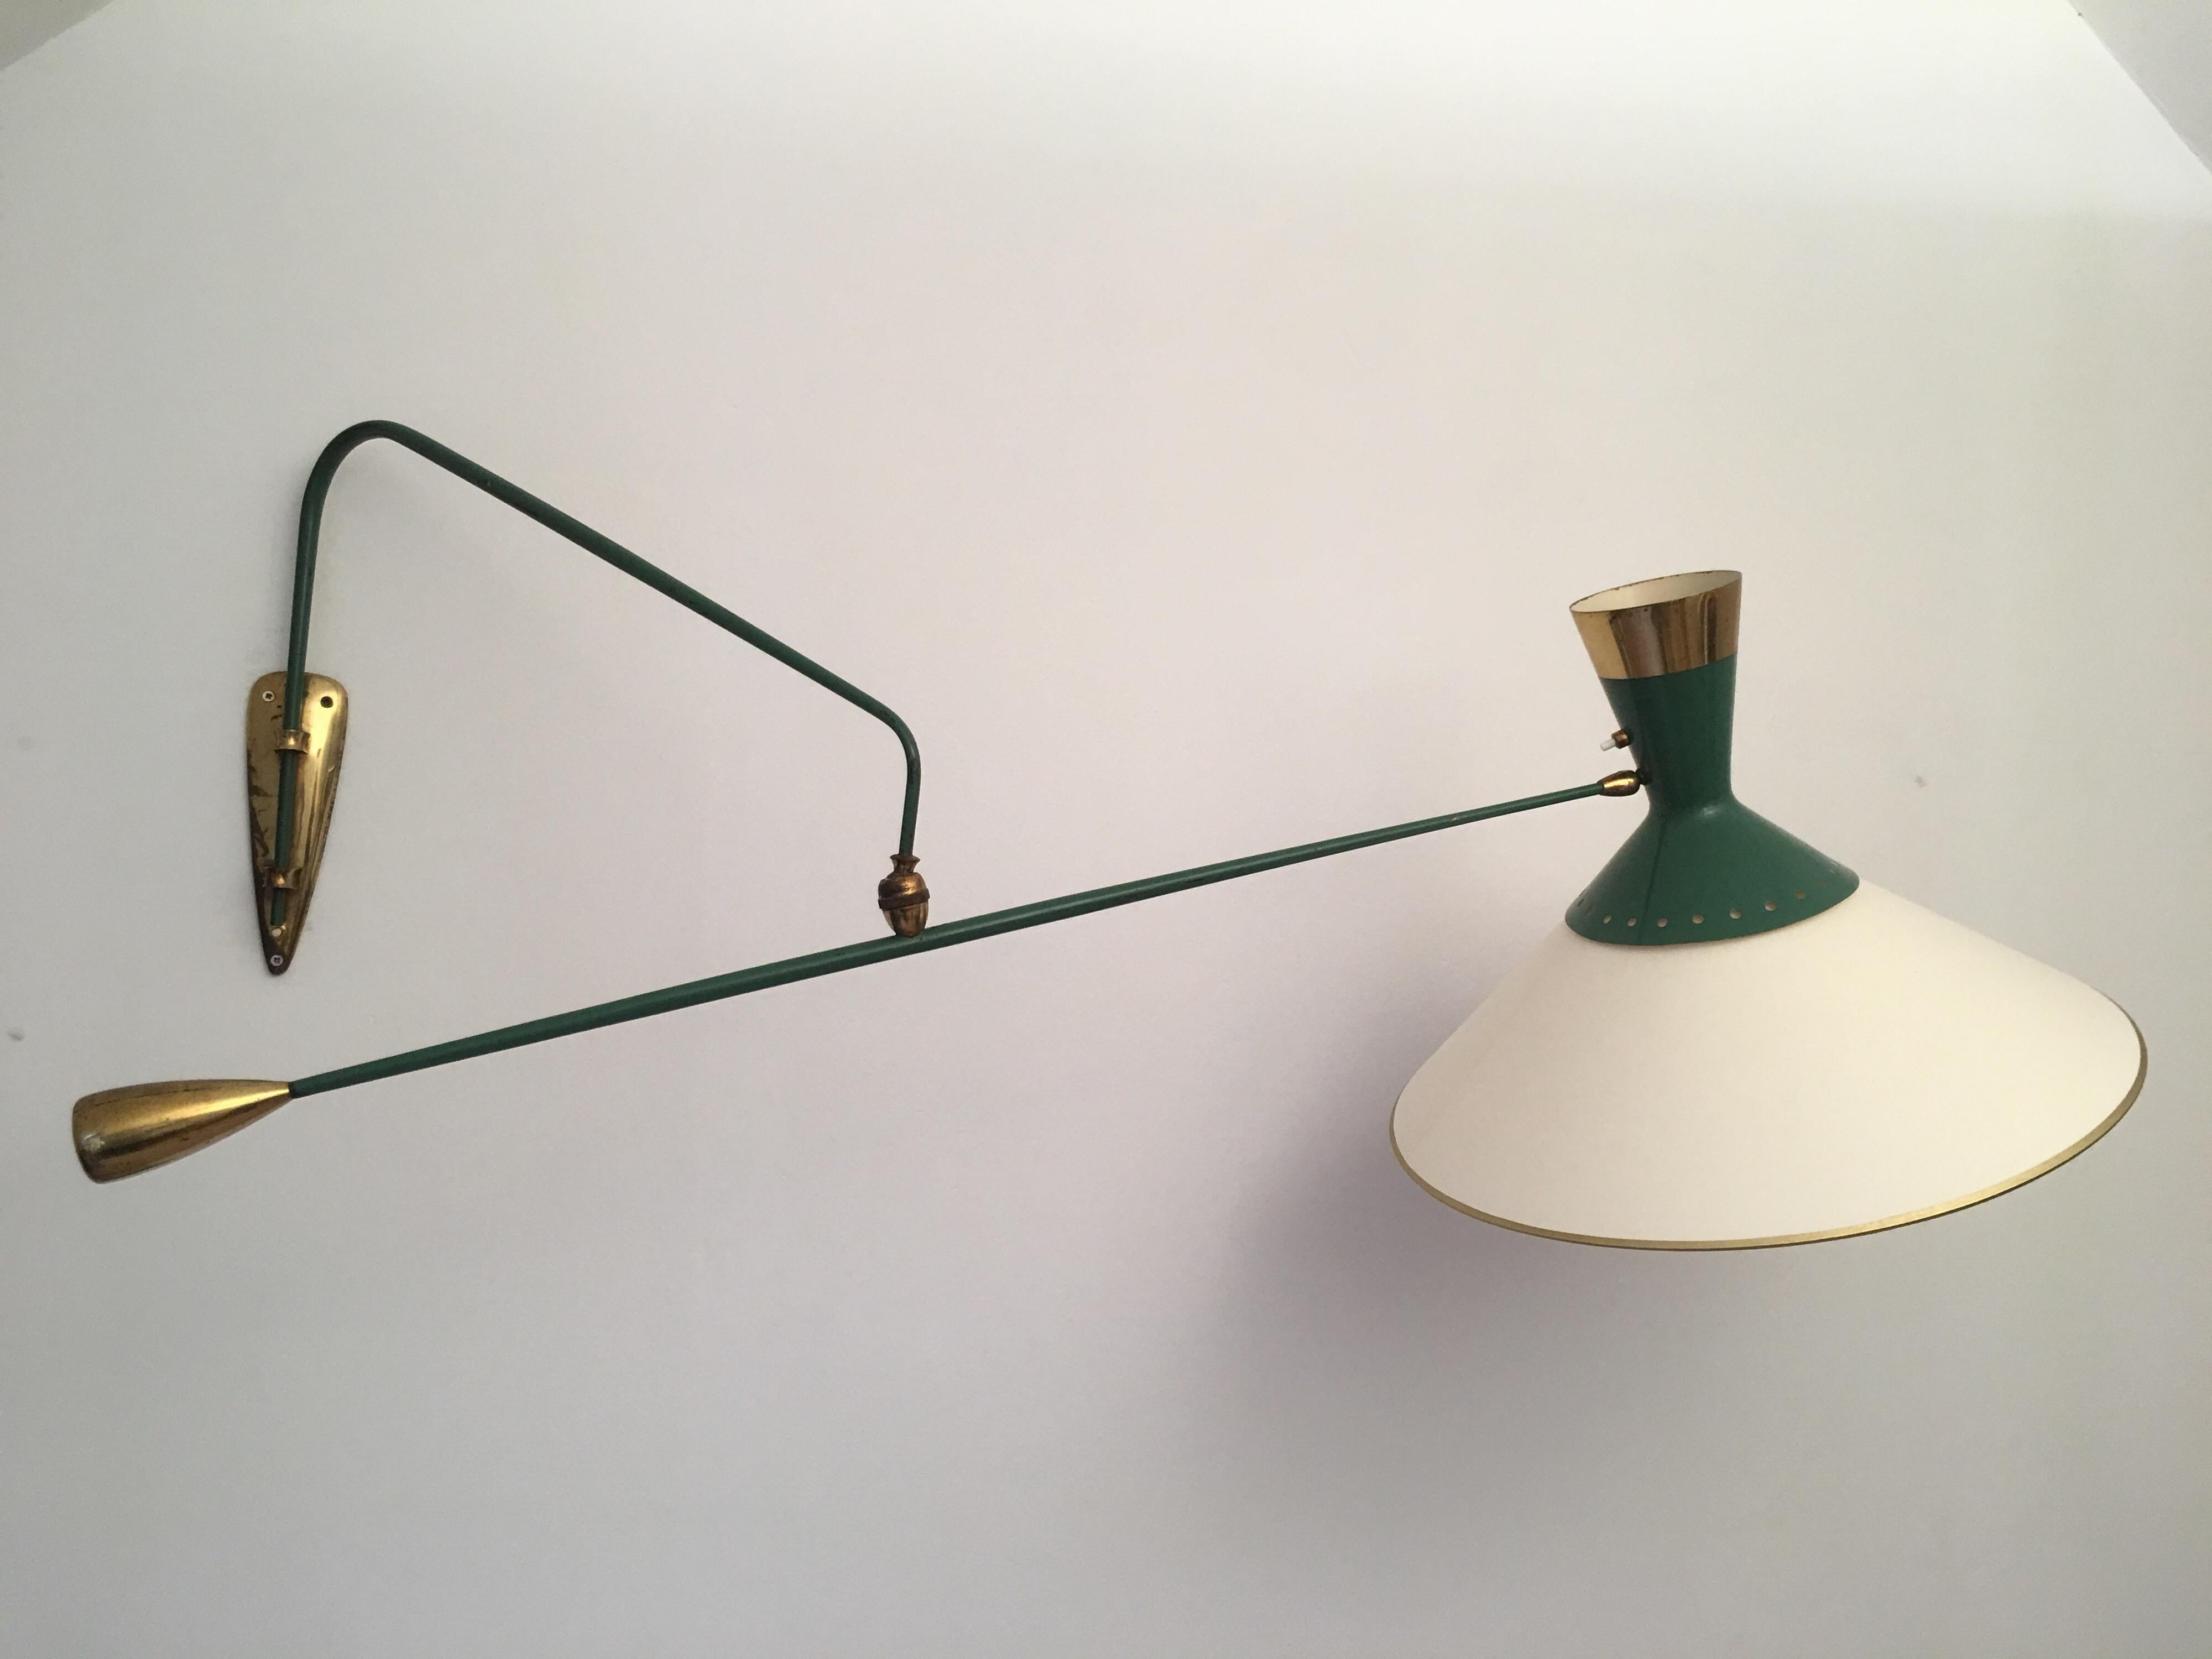 Rare green and gilt sconce designed by Maison Arlus in 1950's.
Two ball joint systems allow to place in all positions the second swing arm and the double metal diabolo reflector. 
The golden metal counterweight ensures the perfect balance.
A new